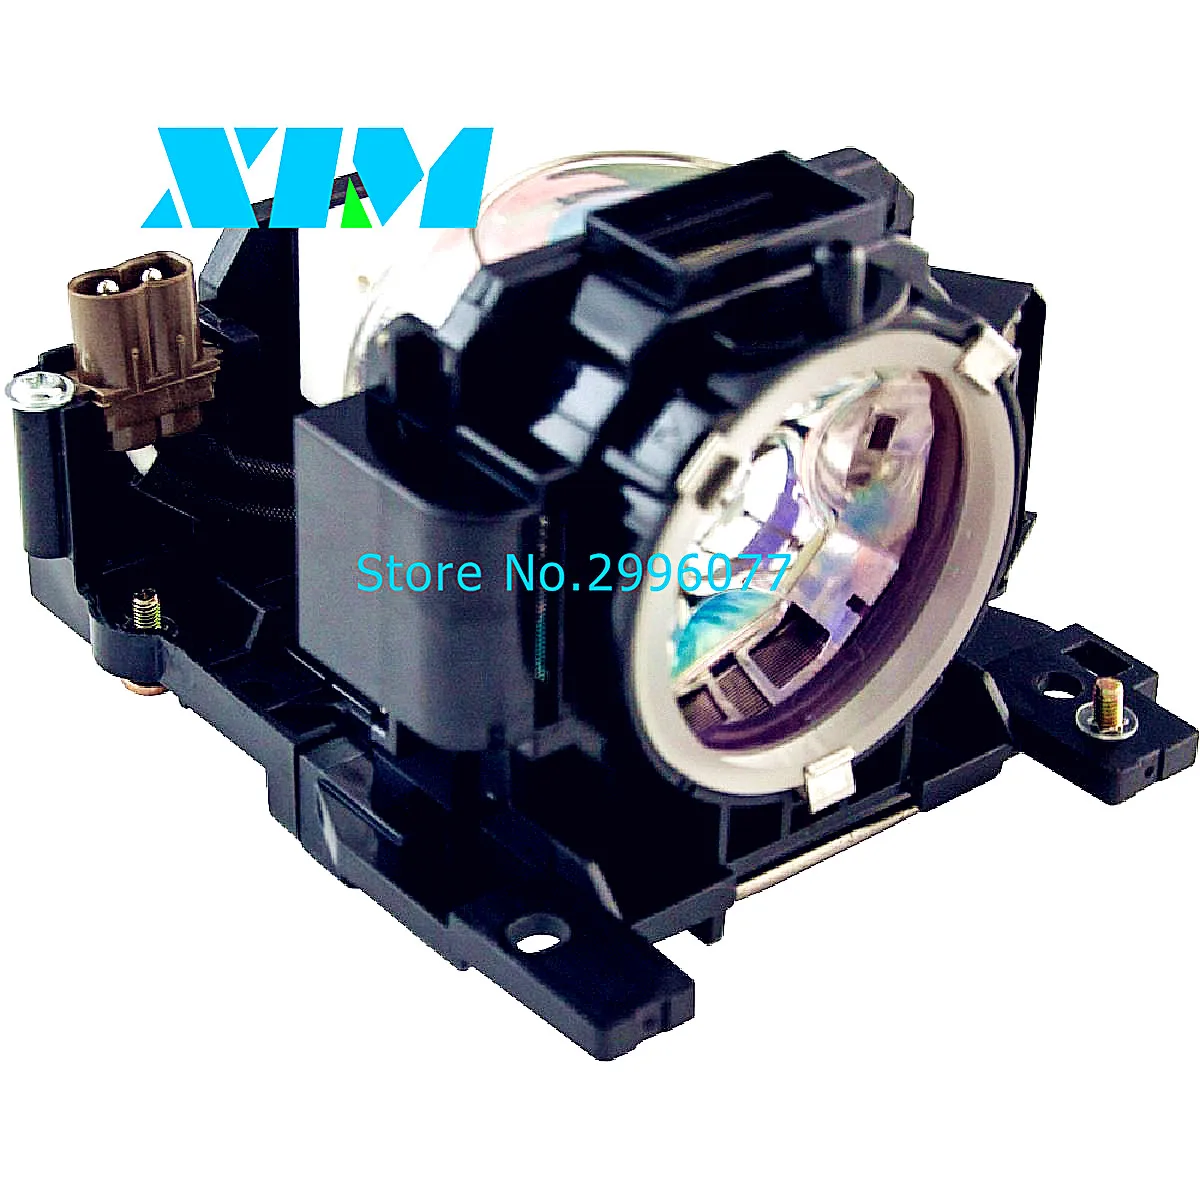 DT00893 Replacement Projector Lamp With Housing For Hitachi CP-A200, CP-A52, ED-A101, ED-A111 Projectors dt00757 replacement projector lamp with housing for hitachi cp x251 cp x256 ed x10 ed x1092 ed x12 ed x15 ed x20 x22 projectors